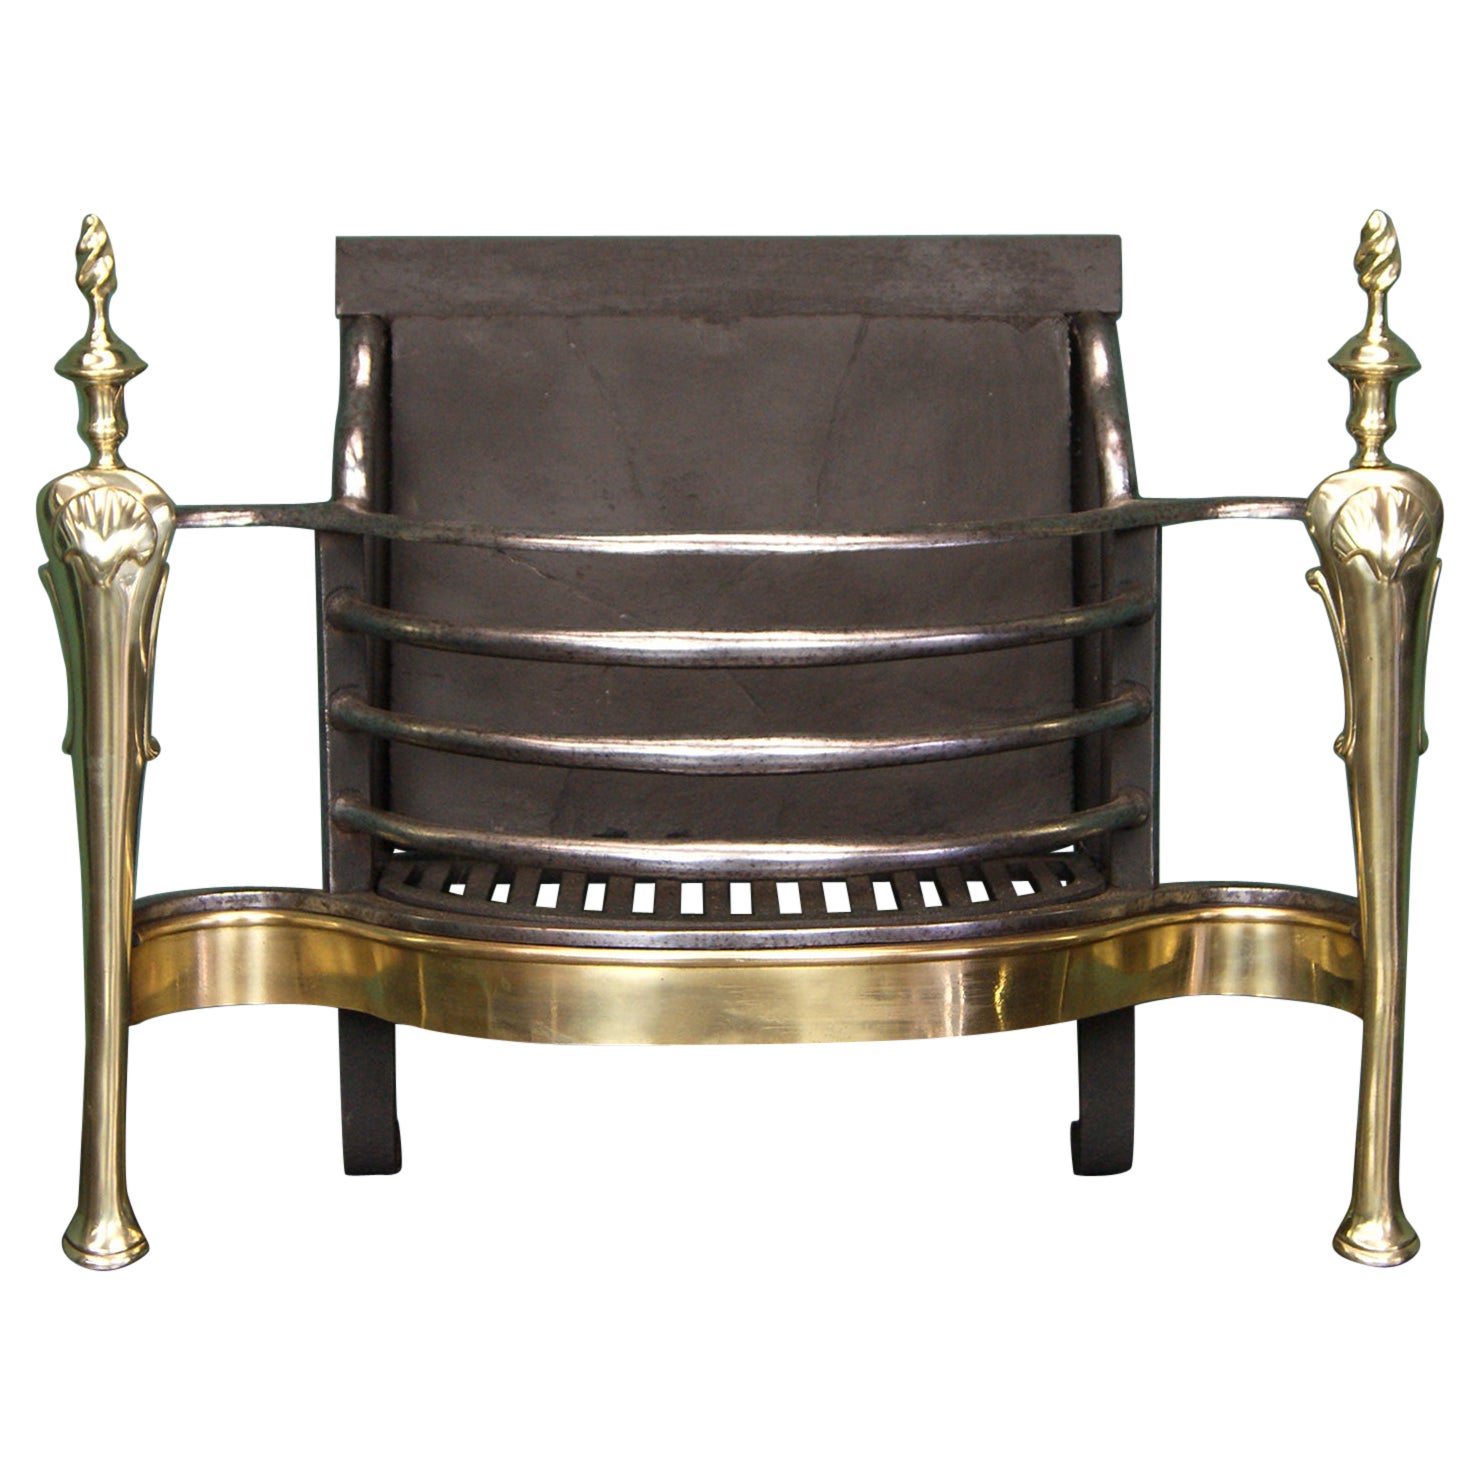 Wrought & Brass Fire Grate in the Queen Anne Manner For Sale